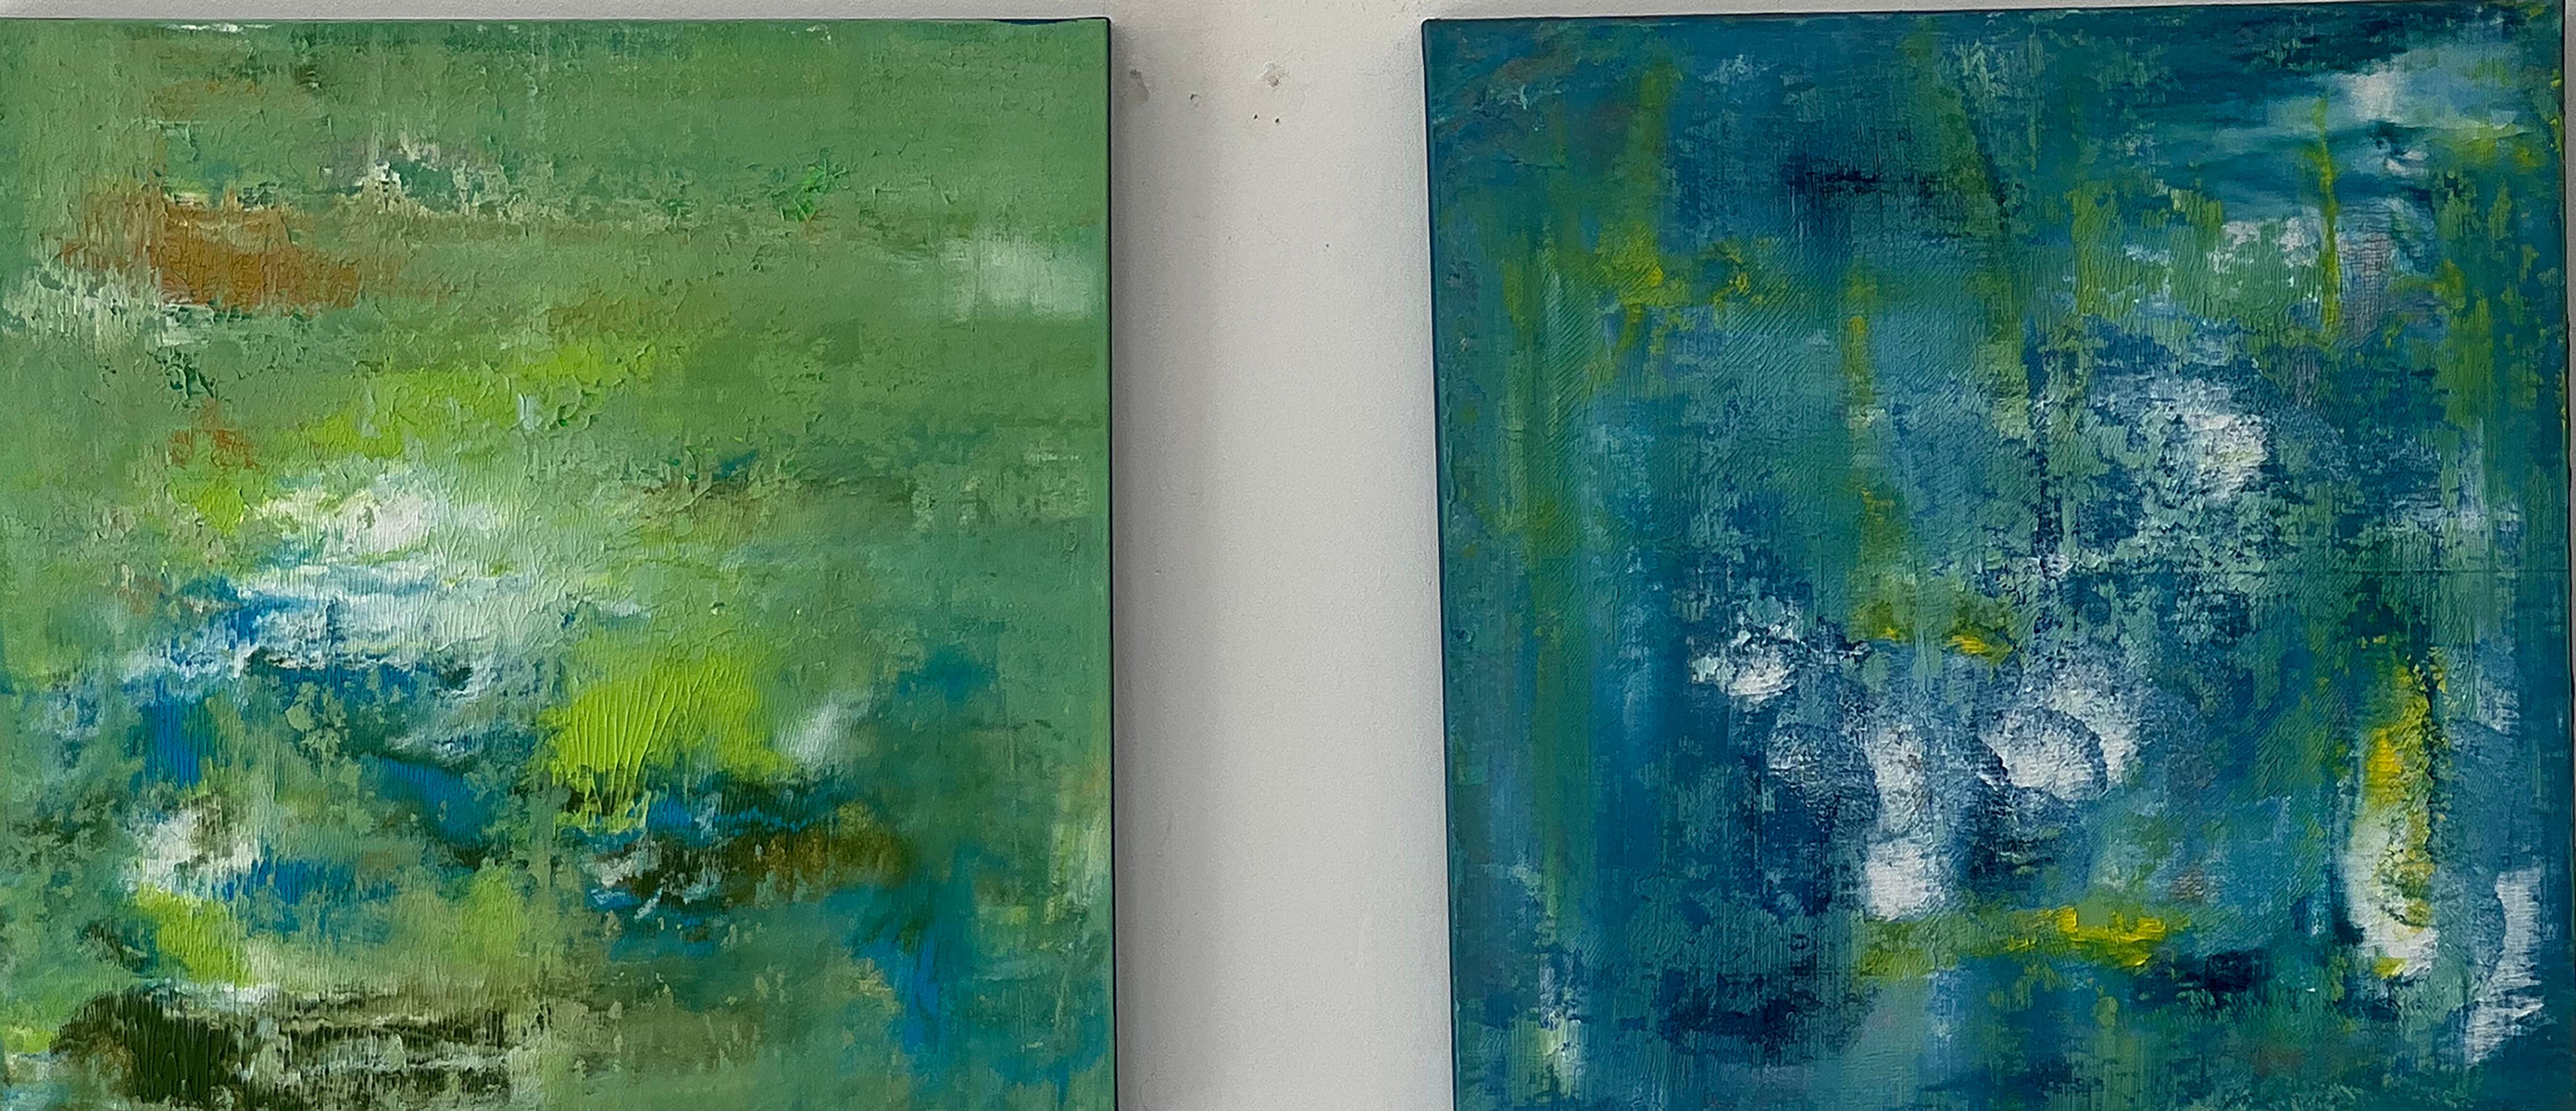 Abstract Painting Nina Weintraub - Diptyque Opal 1 & 2 - acrylique sur toile